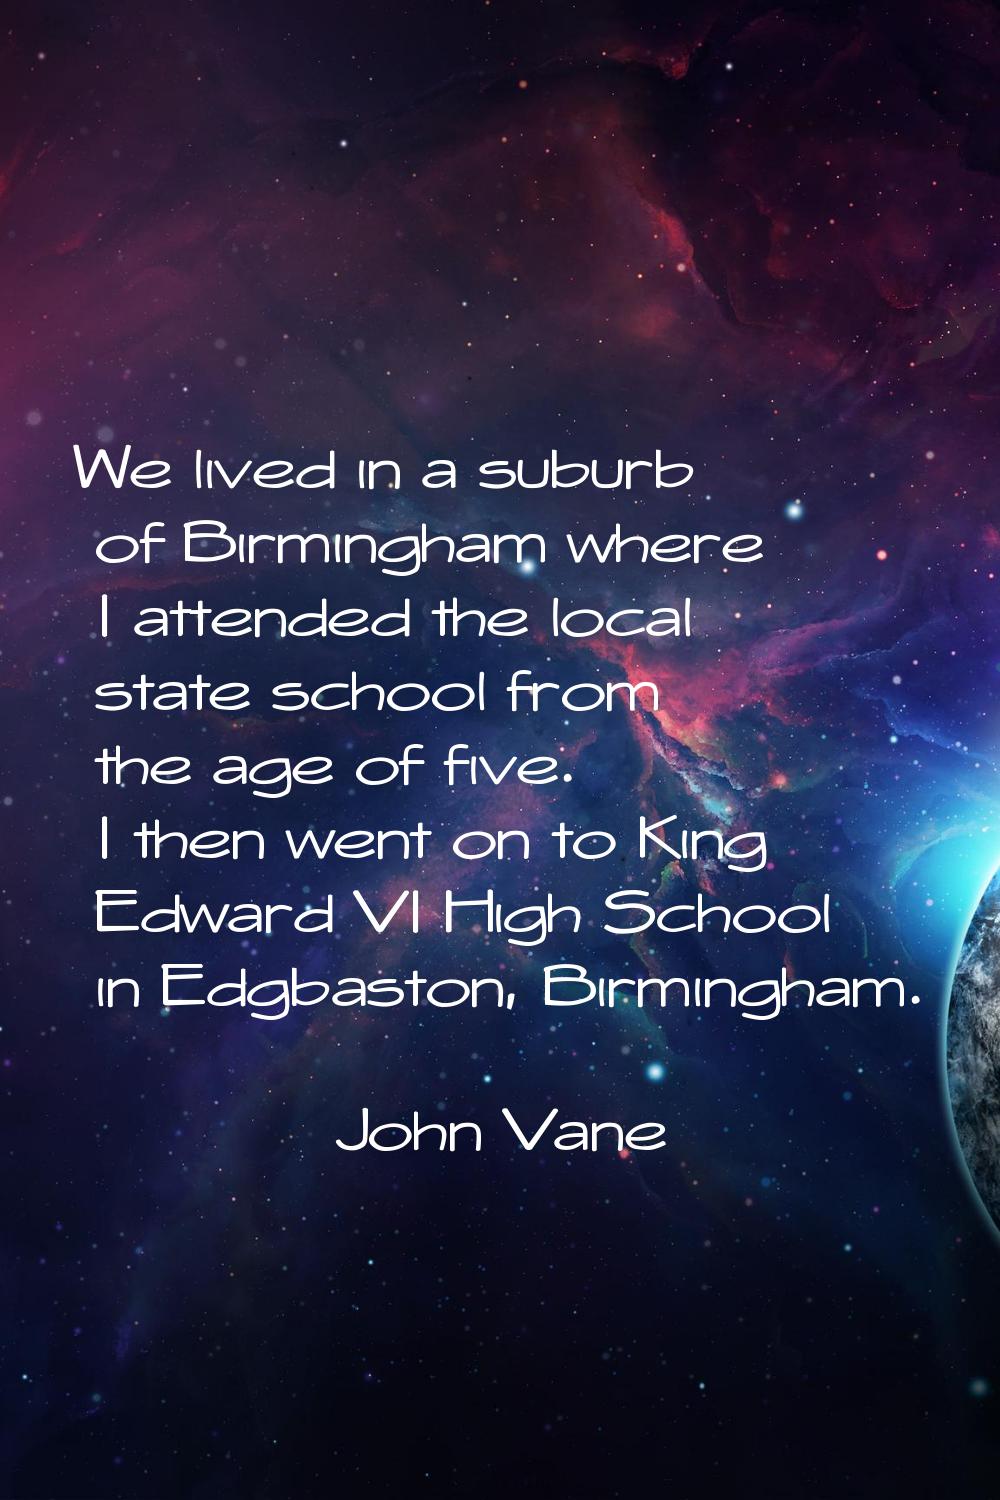 We lived in a suburb of Birmingham where I attended the local state school from the age of five. I 